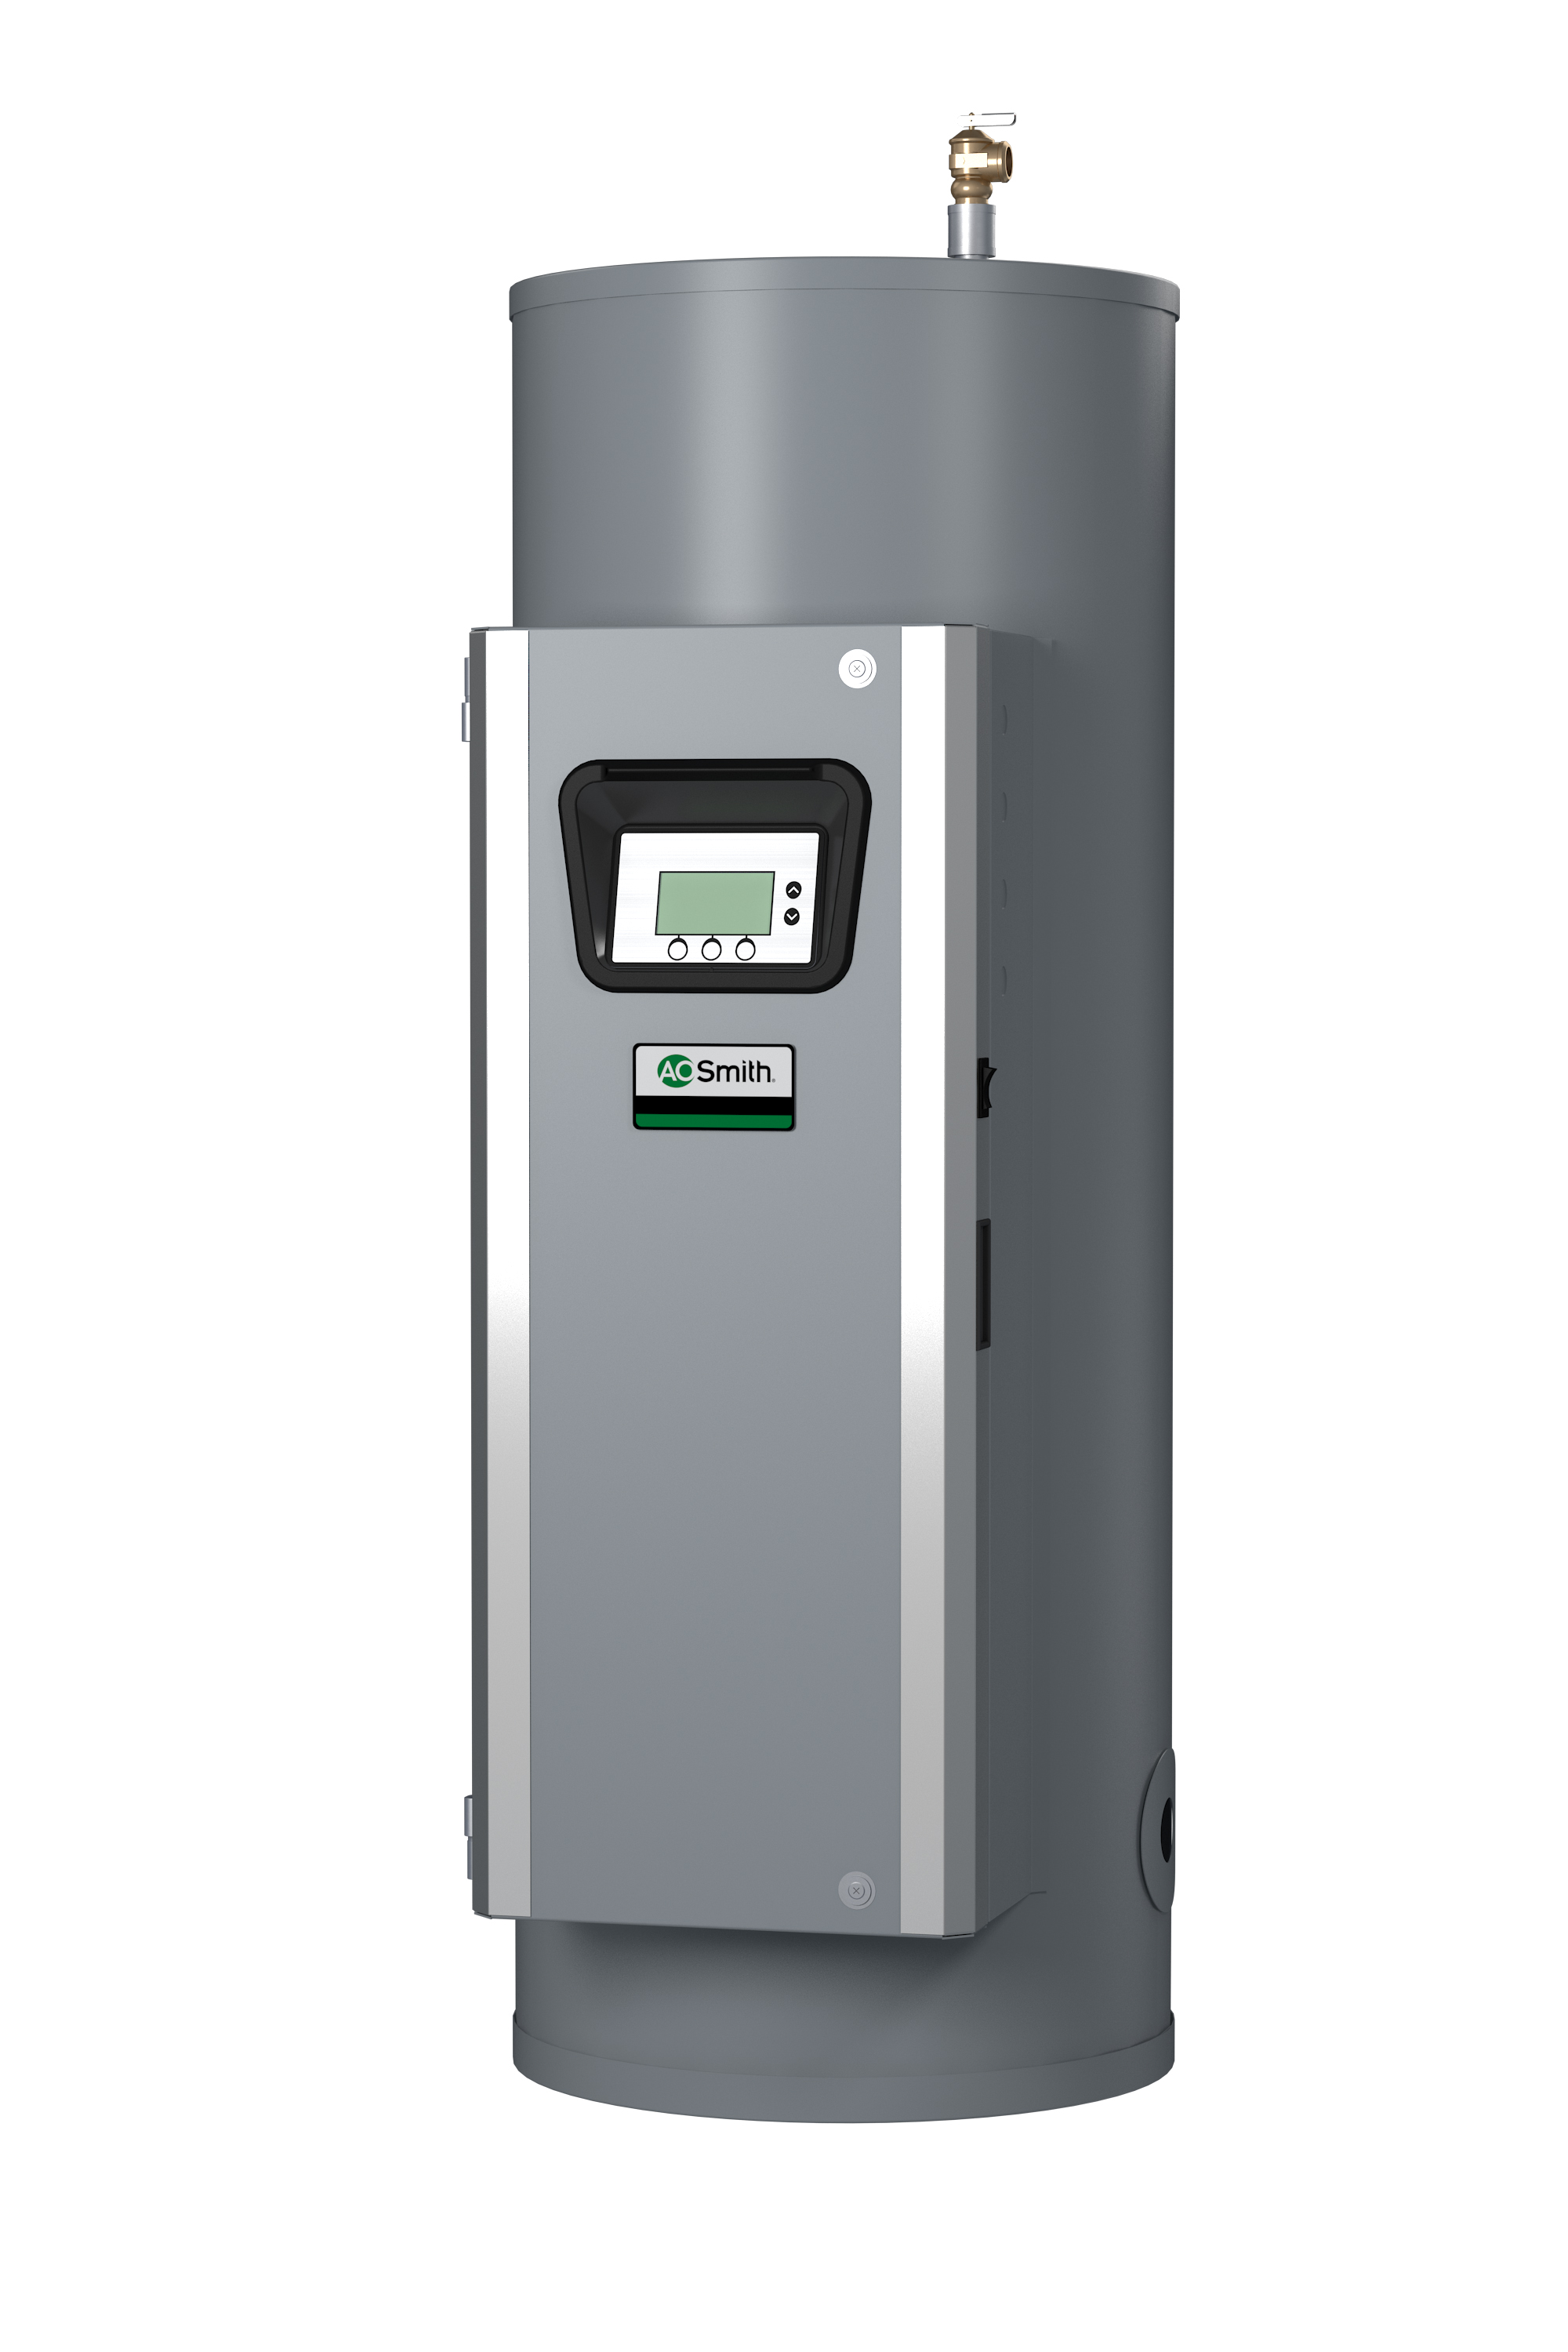 AO SMITH DSE-120A-36, 120 GALLONS, 36KW, 240 VOLT, 150 AMPS, 1 PHASE, 2 ELEMENTS, ASME CUSTOM Xi SERIES HEAVY DUTY COMMERCIAL ELECTRIC WATER HEATER